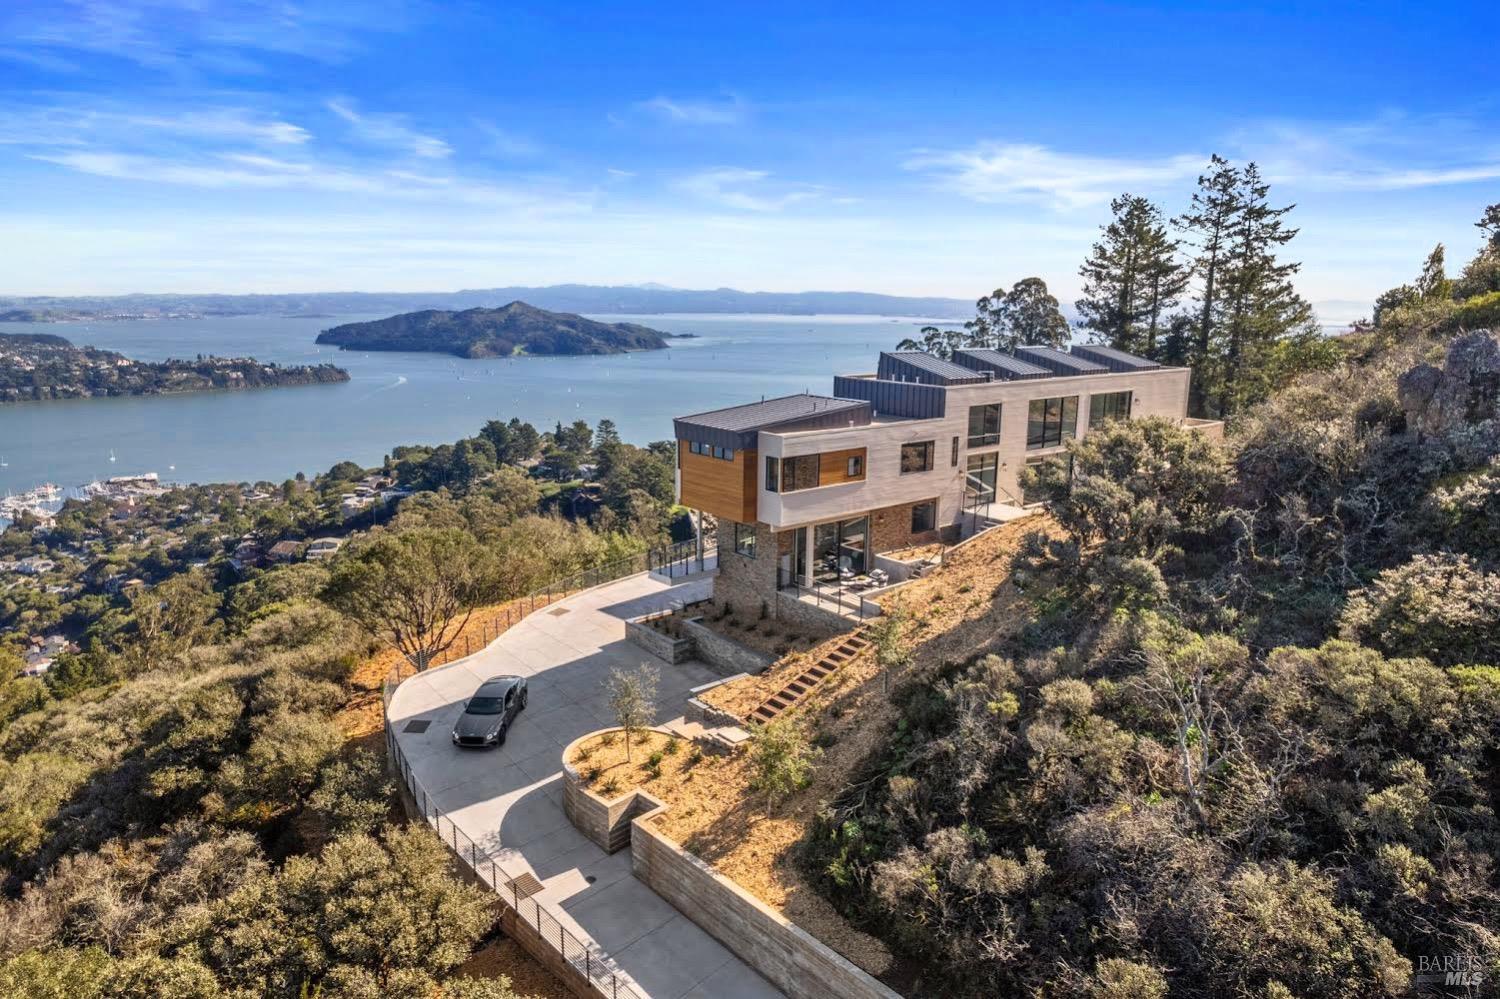 Photo of 3 Wolfback Ridge Rd in Sausalito, CA